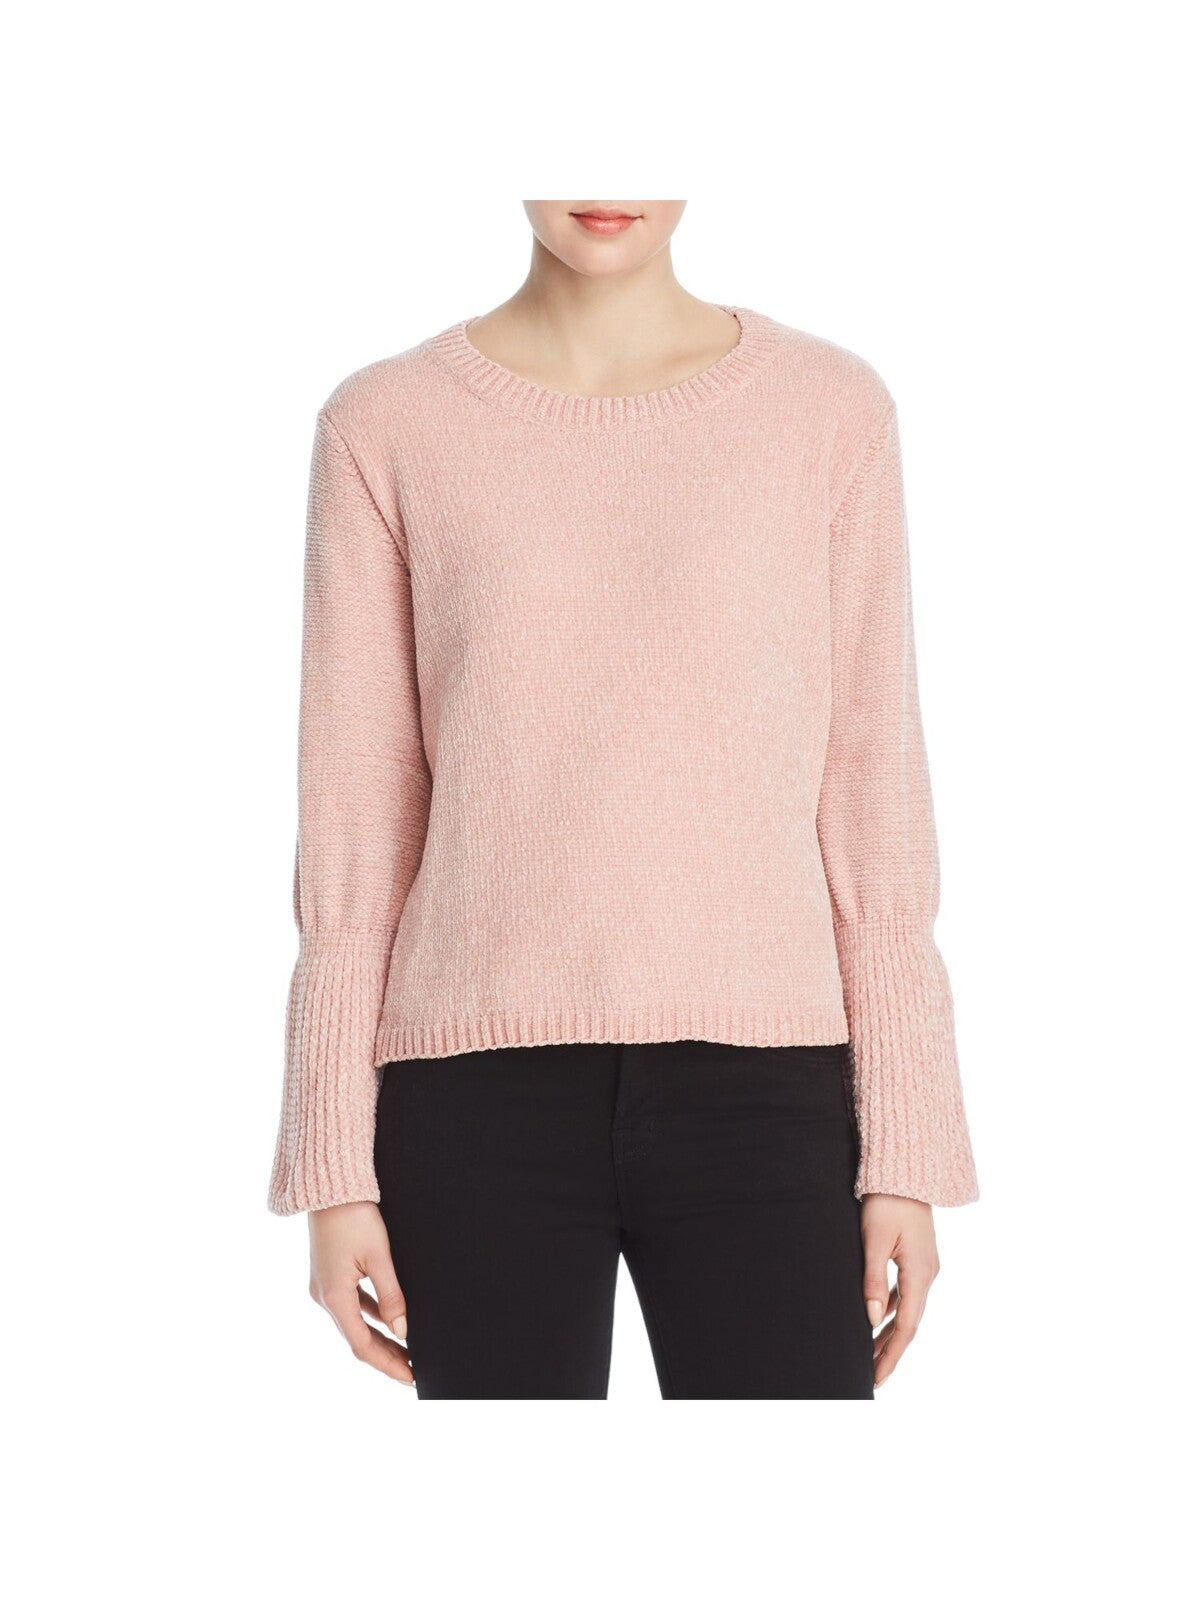 ELAN Womens Pink Ribbed Chenille Bell Sleeve Crew Neck Sweater M